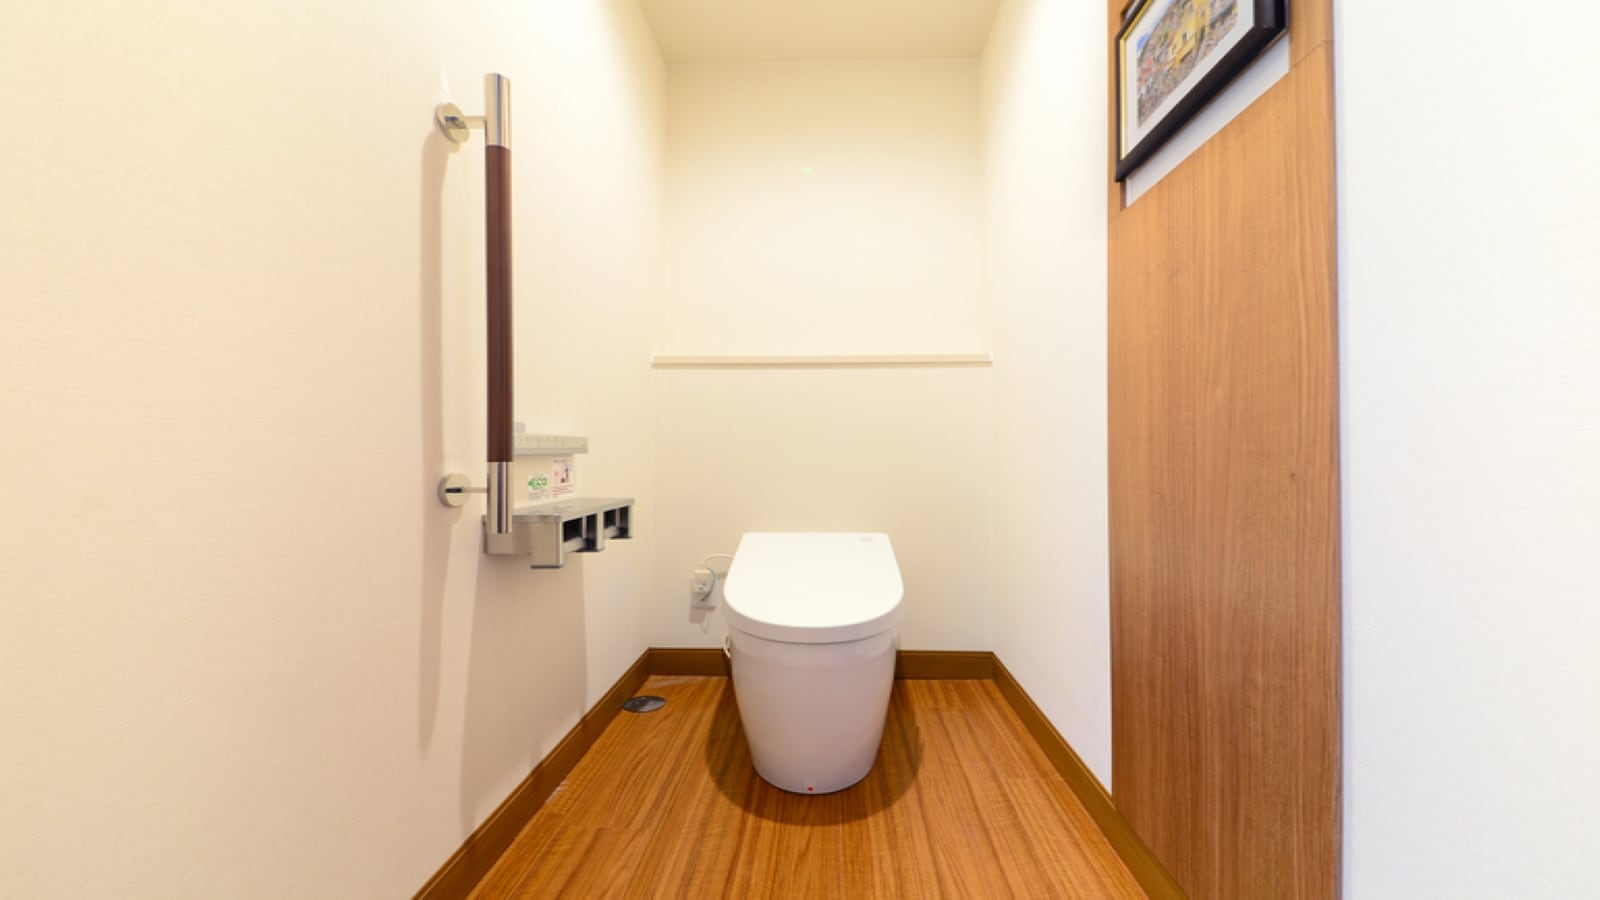 Separate bath and toilet! No worries even if you stay with your family or multiple people!